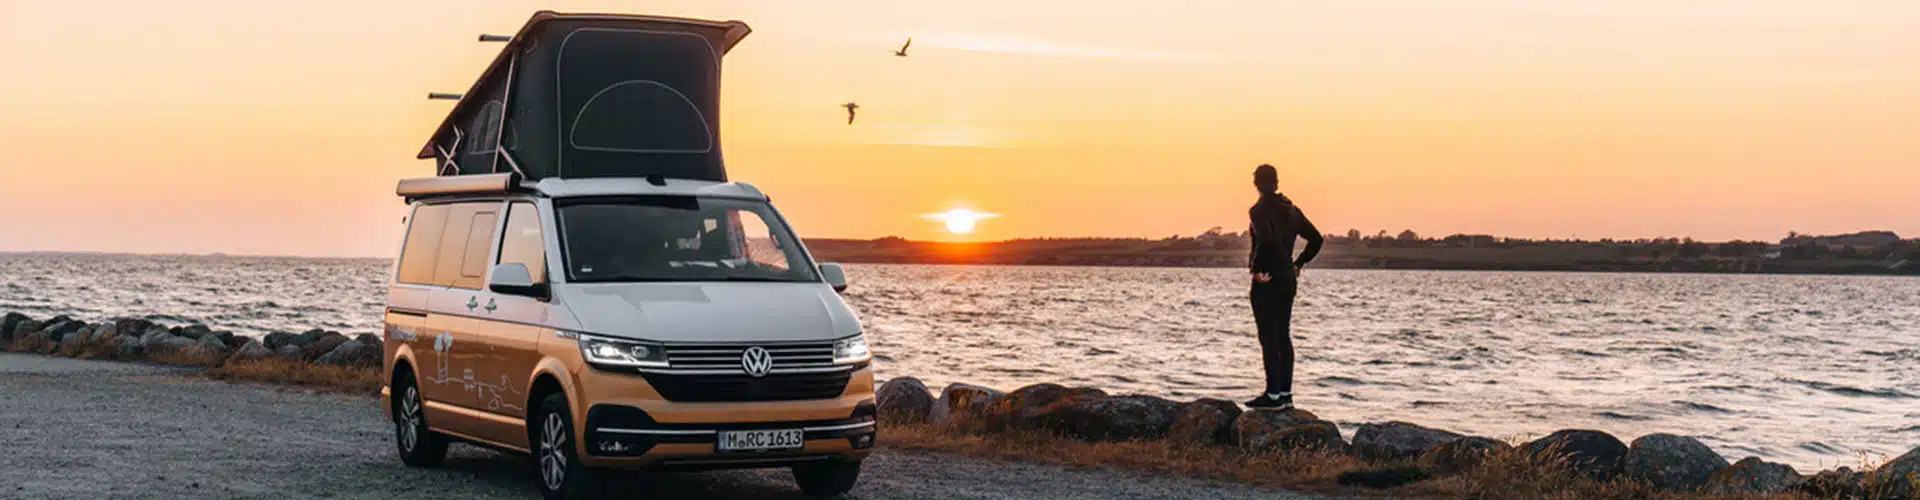 roadsurfer camper van with pop-up roof parked next to a beach at sunset